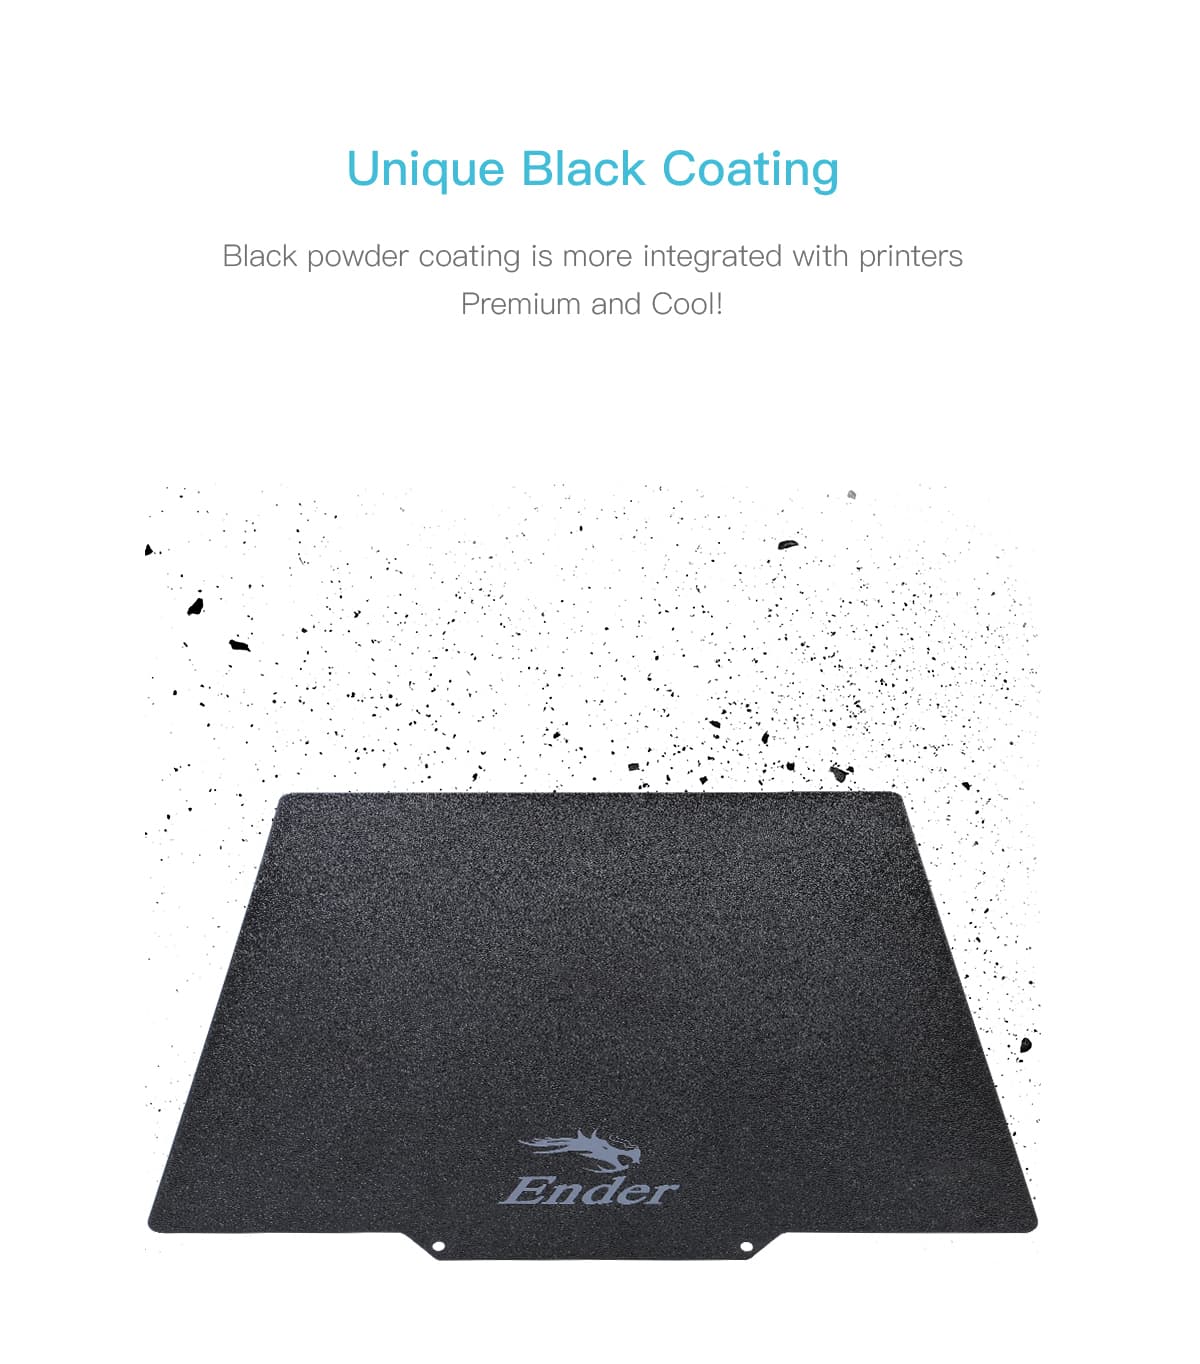 PEI Magnetic Flexible Sheet / Plate comes with black powdered coating.